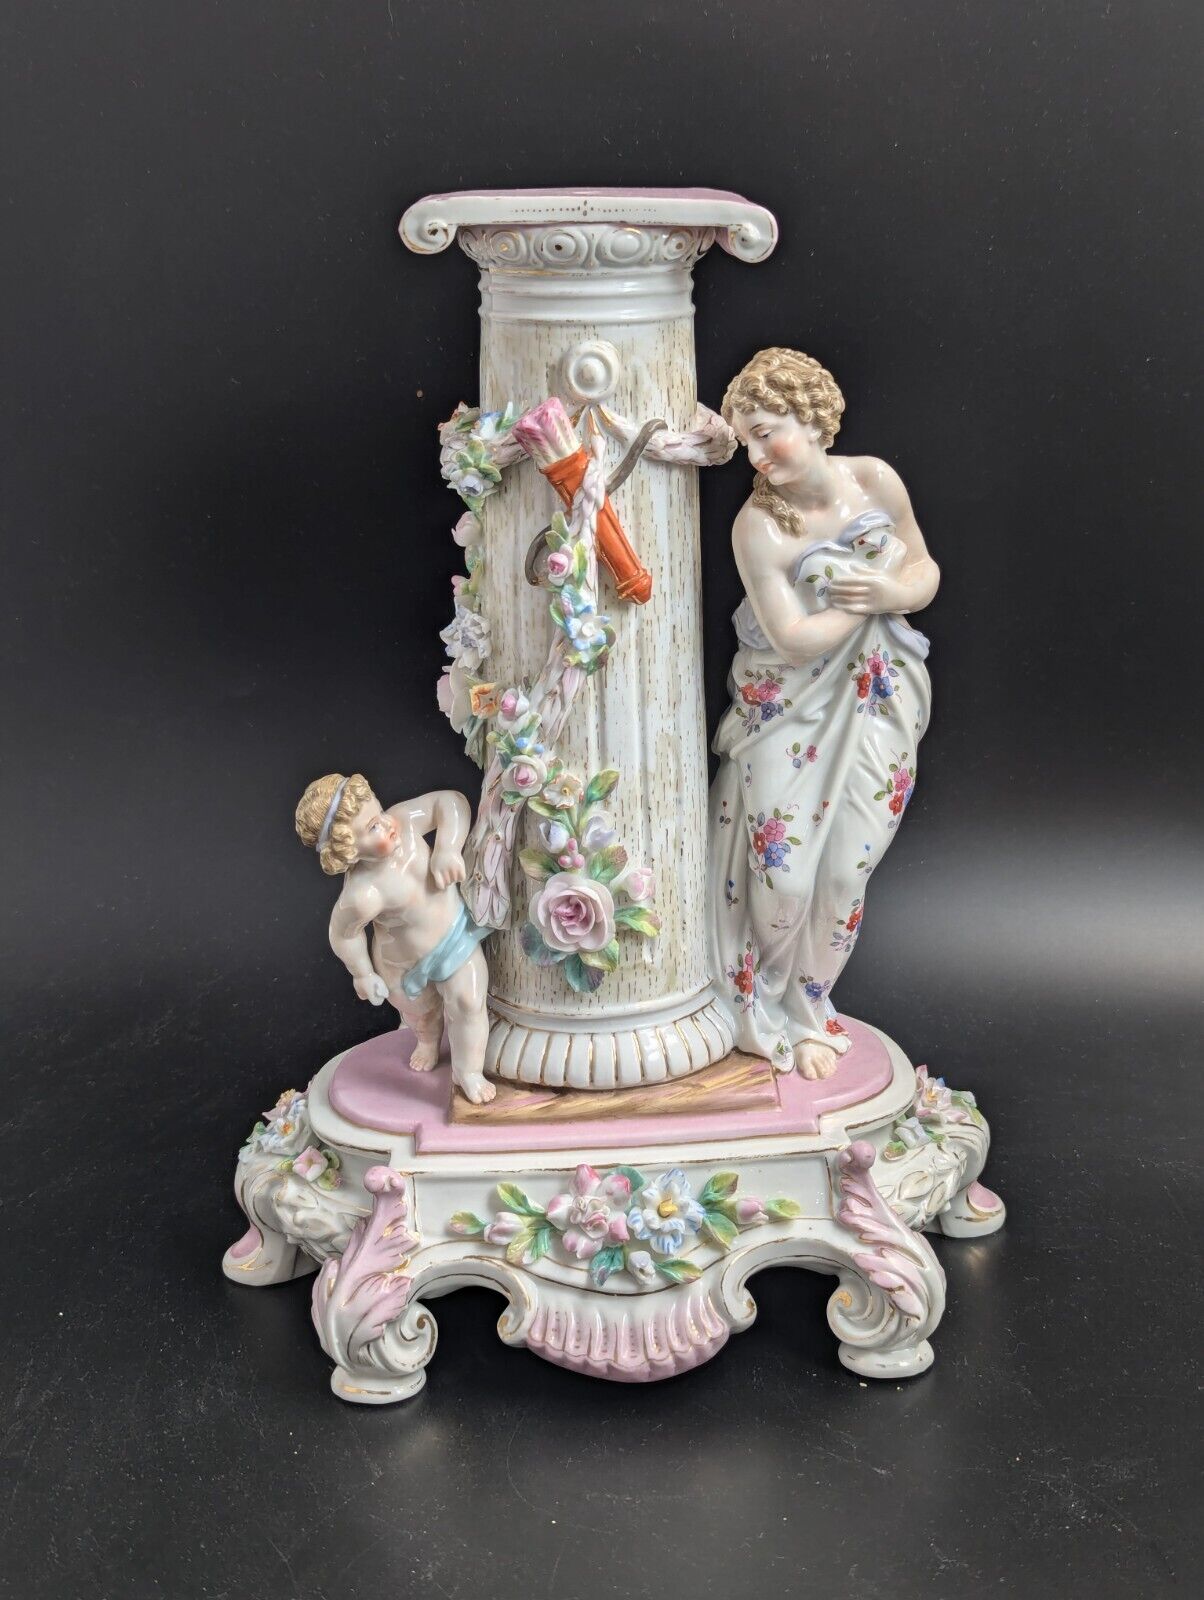 Antique figurine of Cupid and Venus, Volkstedt porcelain, mid 19th century